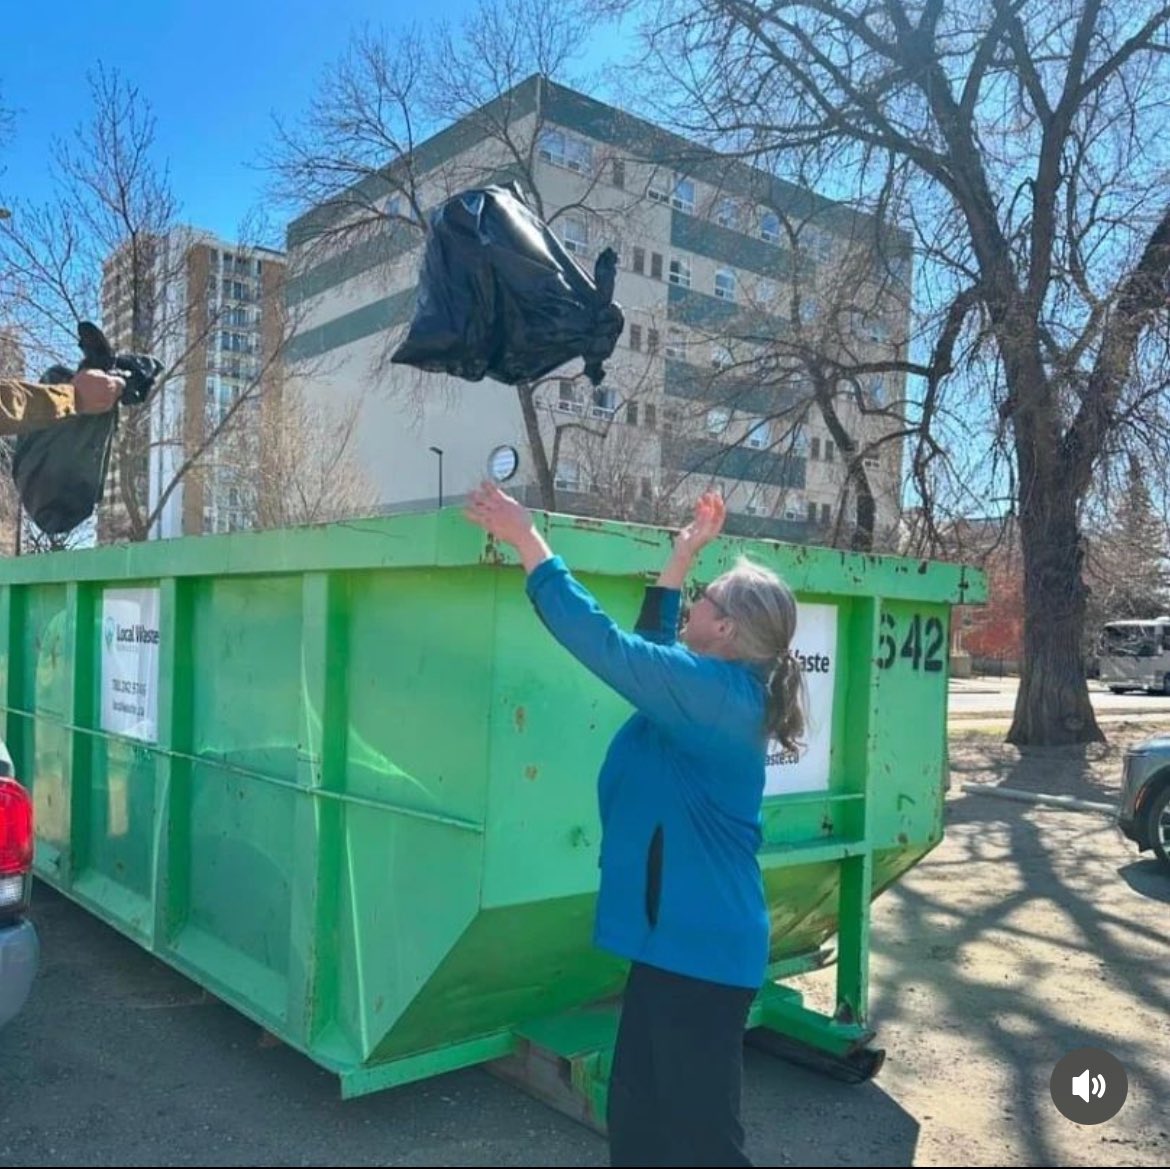 Thank you downtown community! 🙌 Yesterday was a sweeping success (pardon the pun). Thank you to everyone who showed up over two days to help clean up litter around downtown. Your efforts made a difference. I ❤️ #yegdt